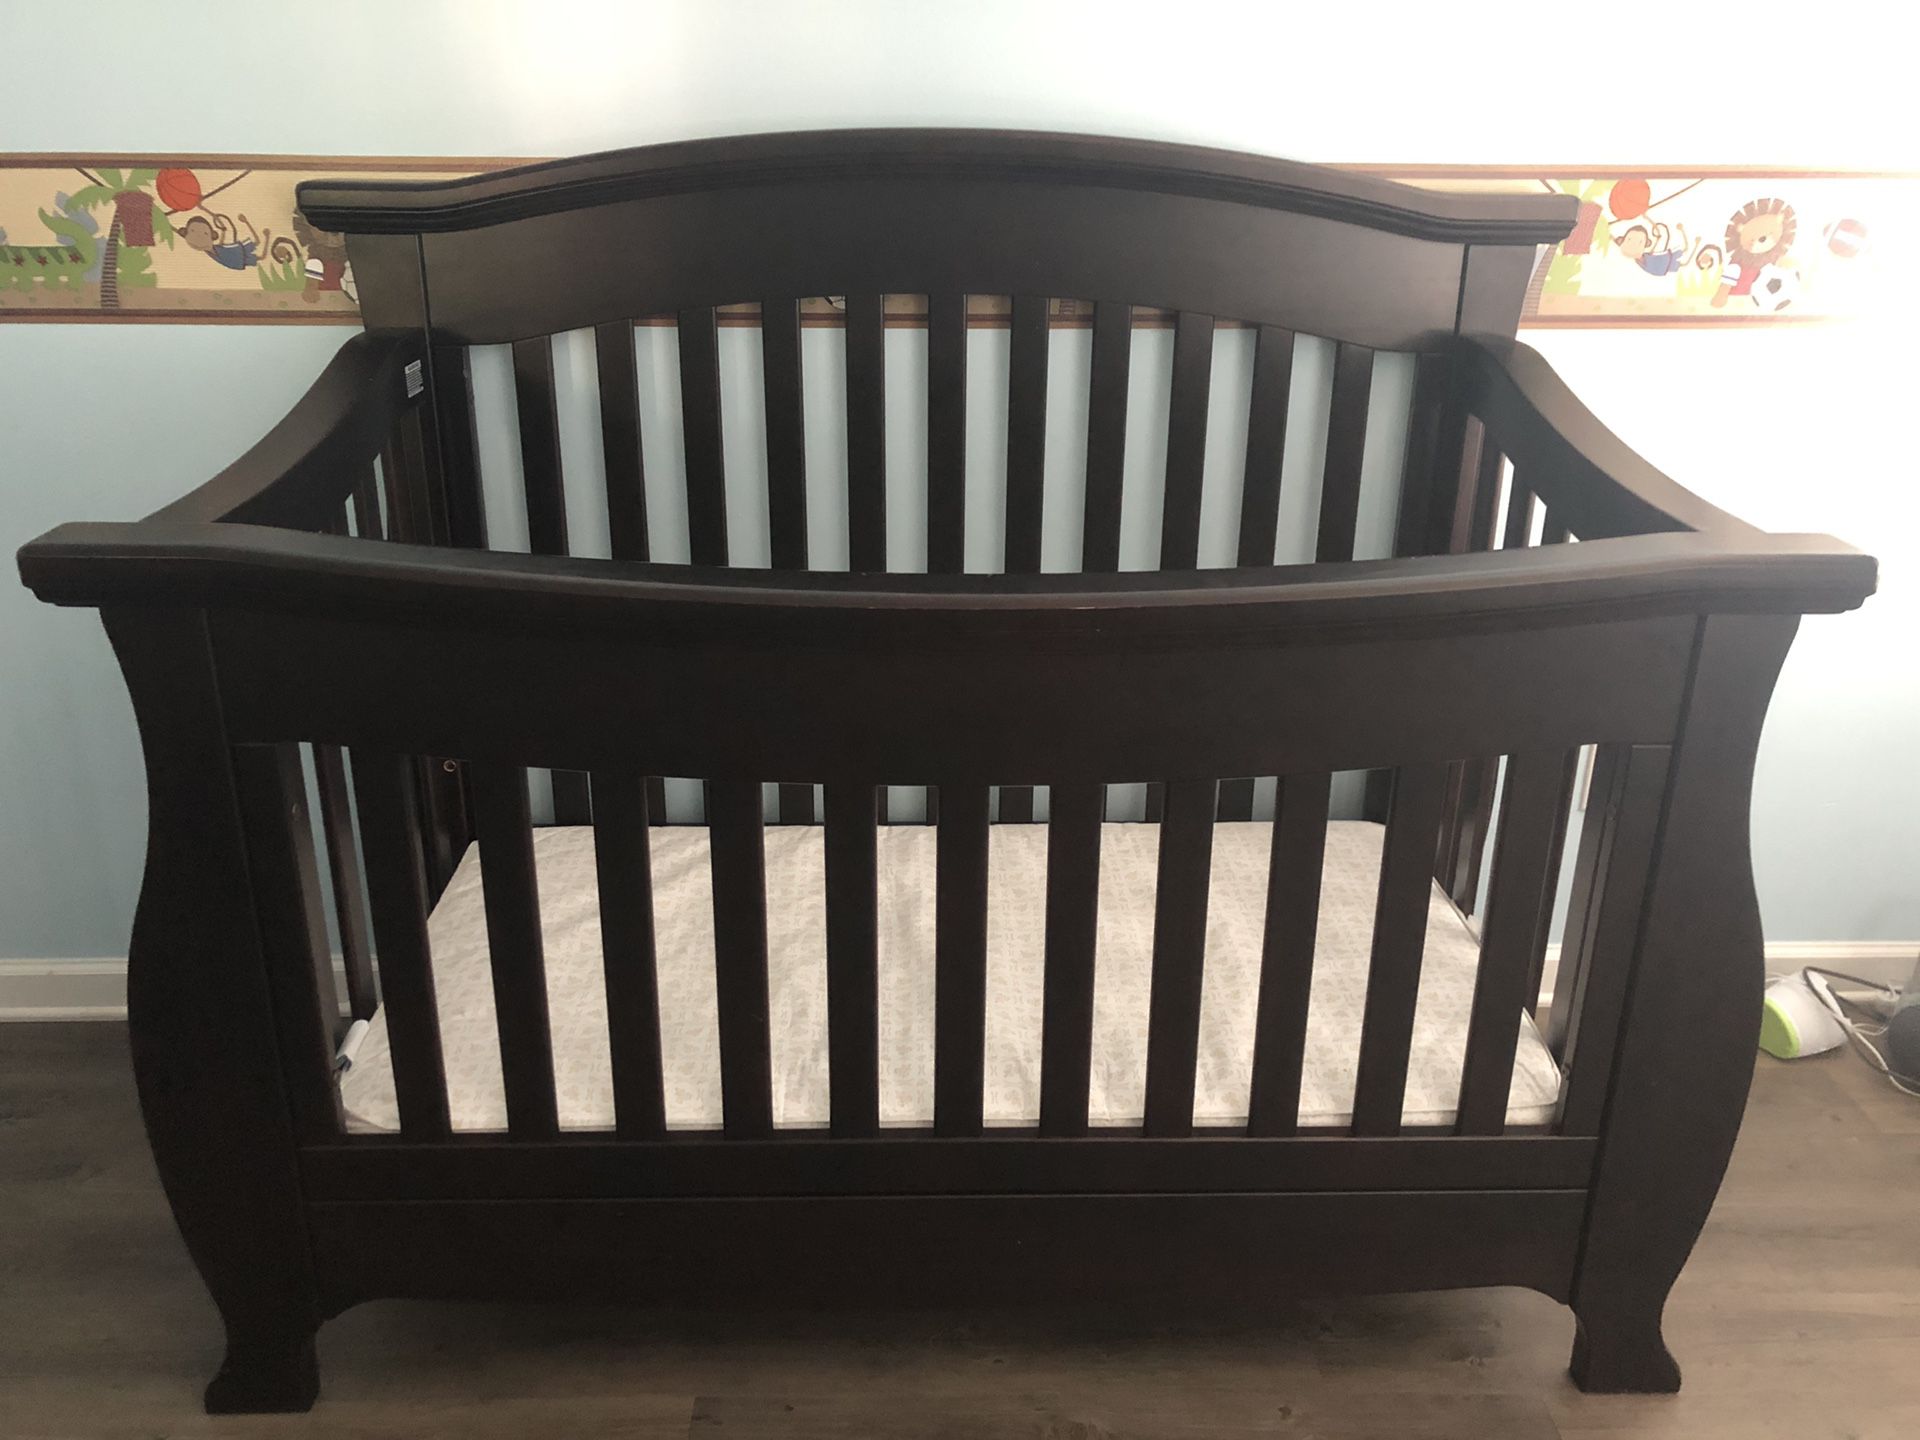 Baby crib - Mattress included